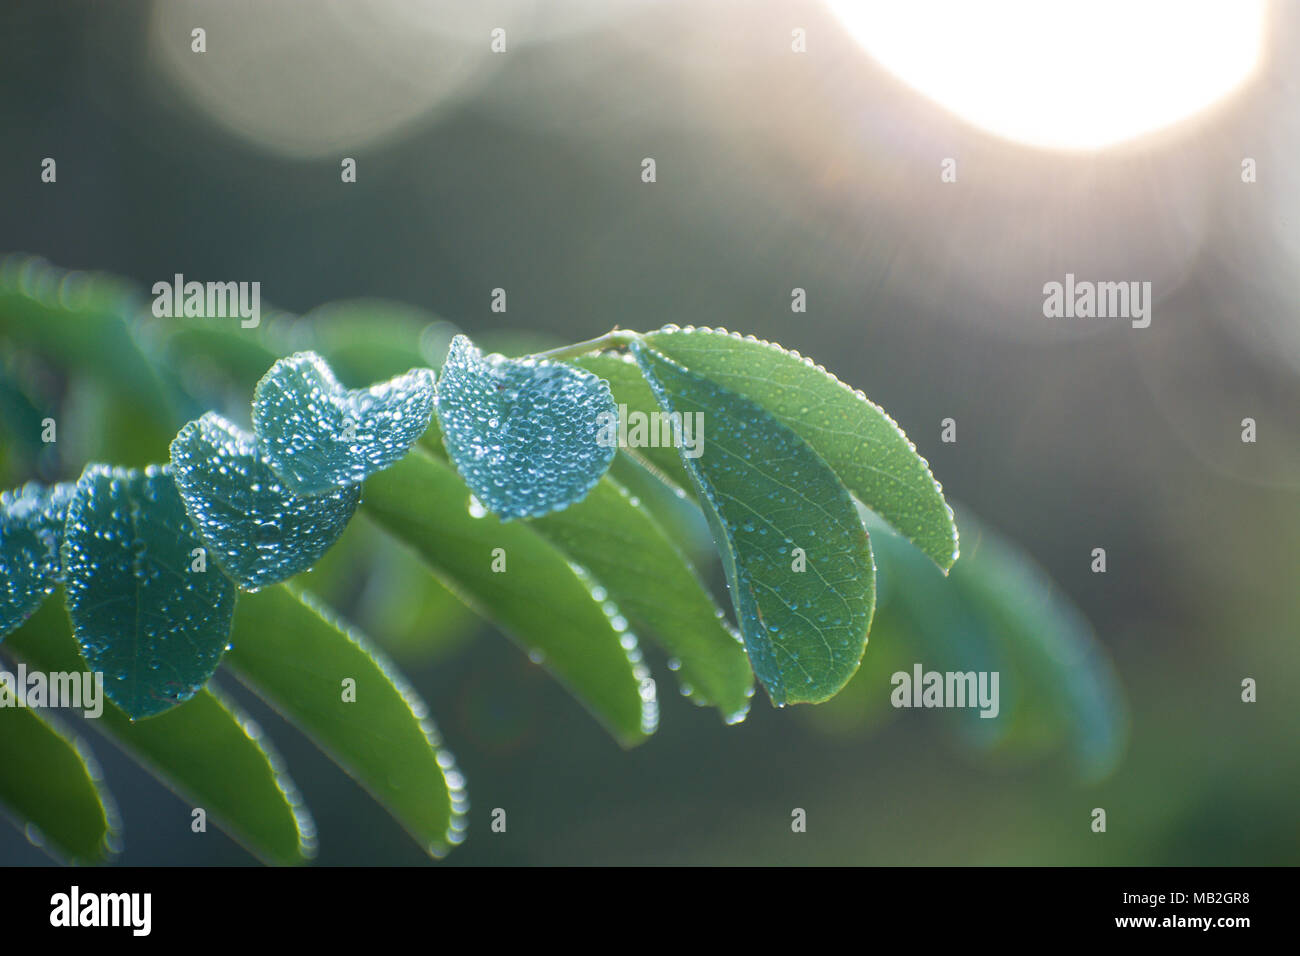 acacia tree branch green leaves. Green blured background Stock Photo